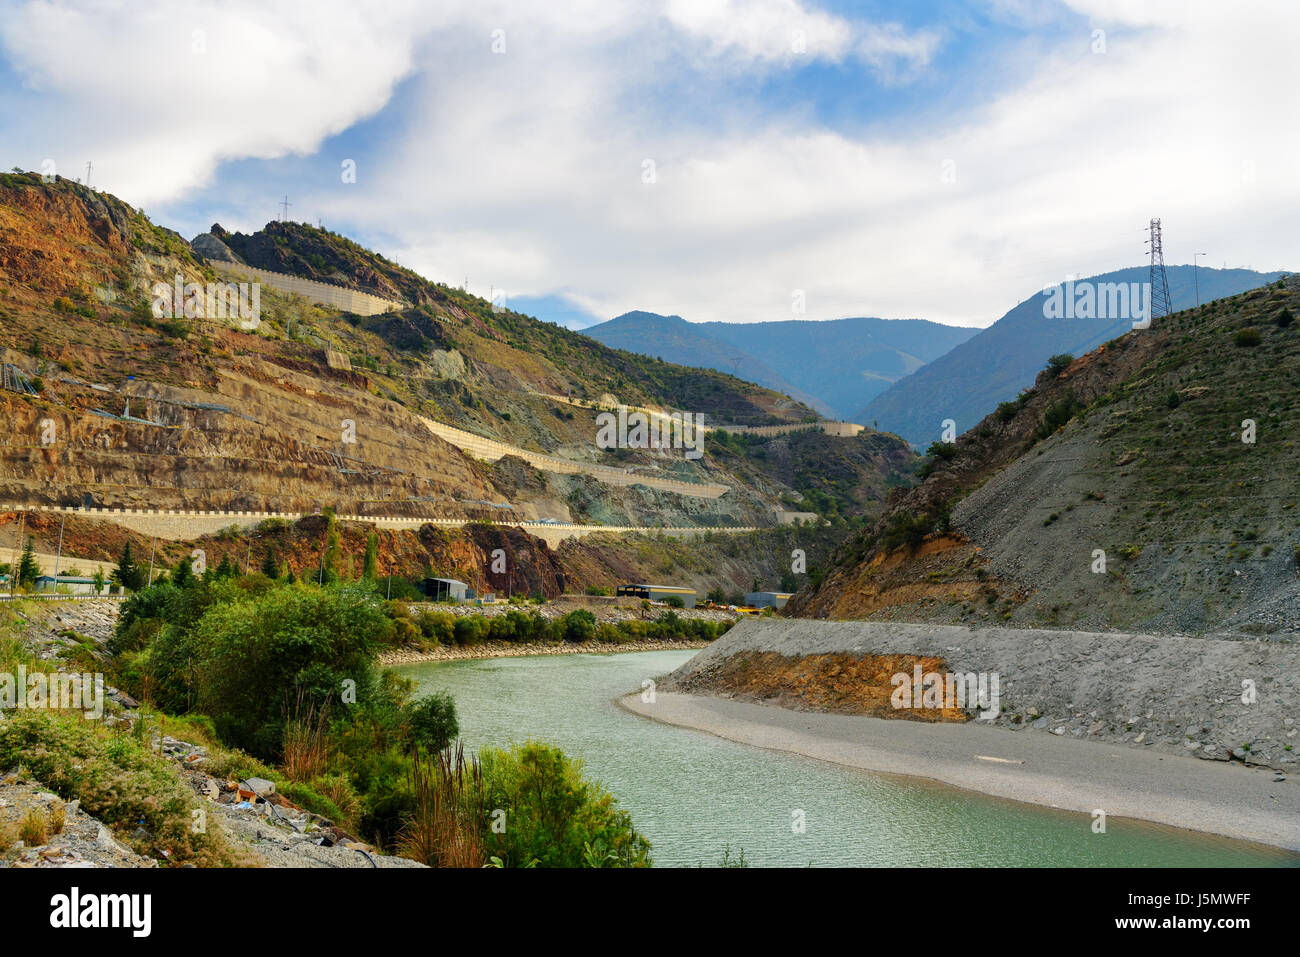 View on Coruh River and mountain with road to Ardahan from Artvin. Turkey Stock Photo